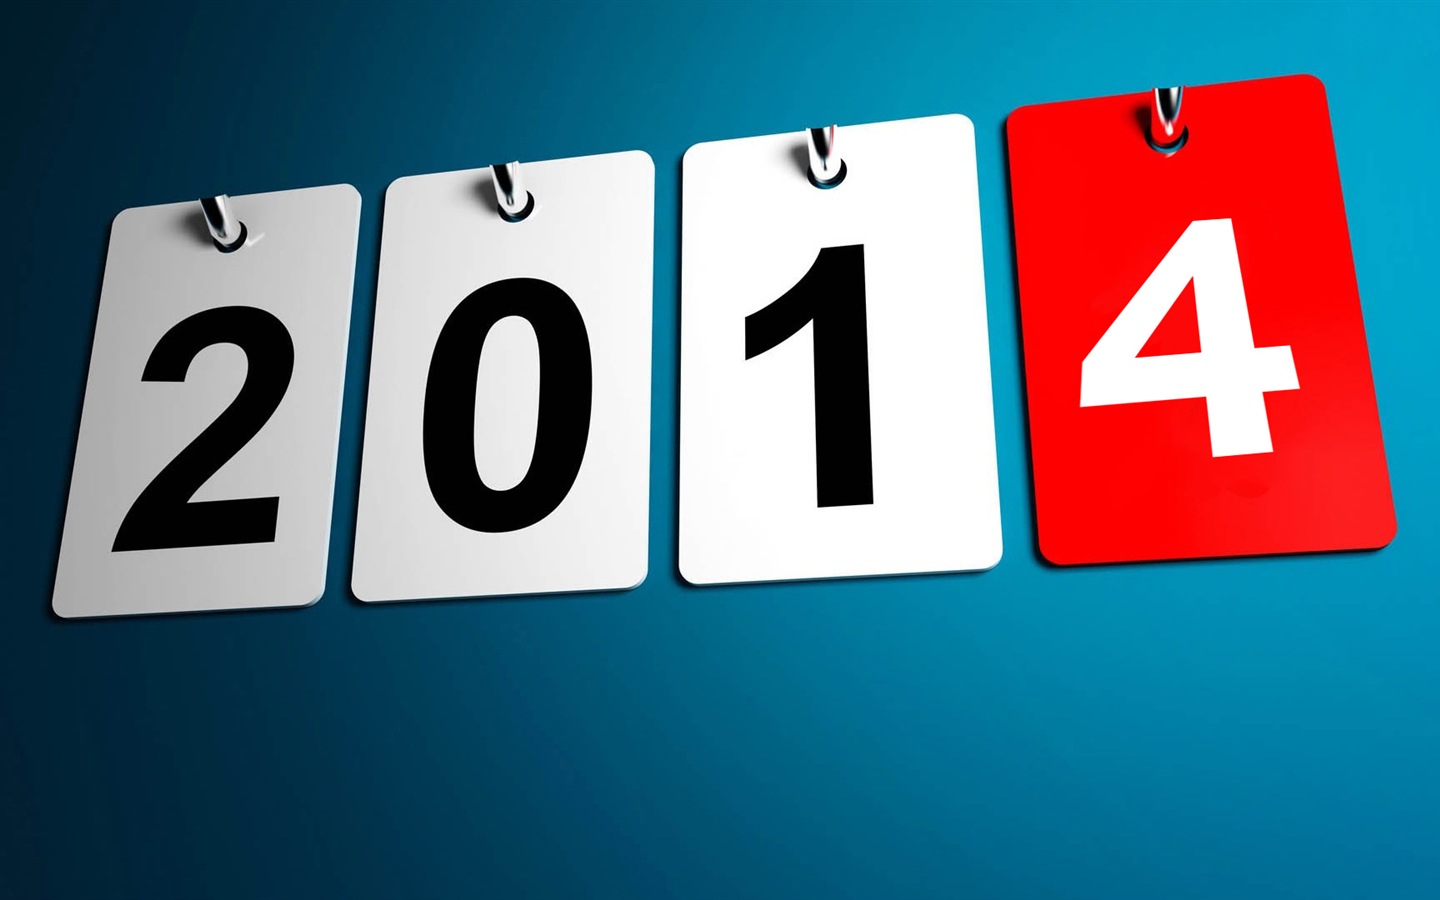 2014 New Year Theme HD Wallpapers (1) #18 - 1440x900